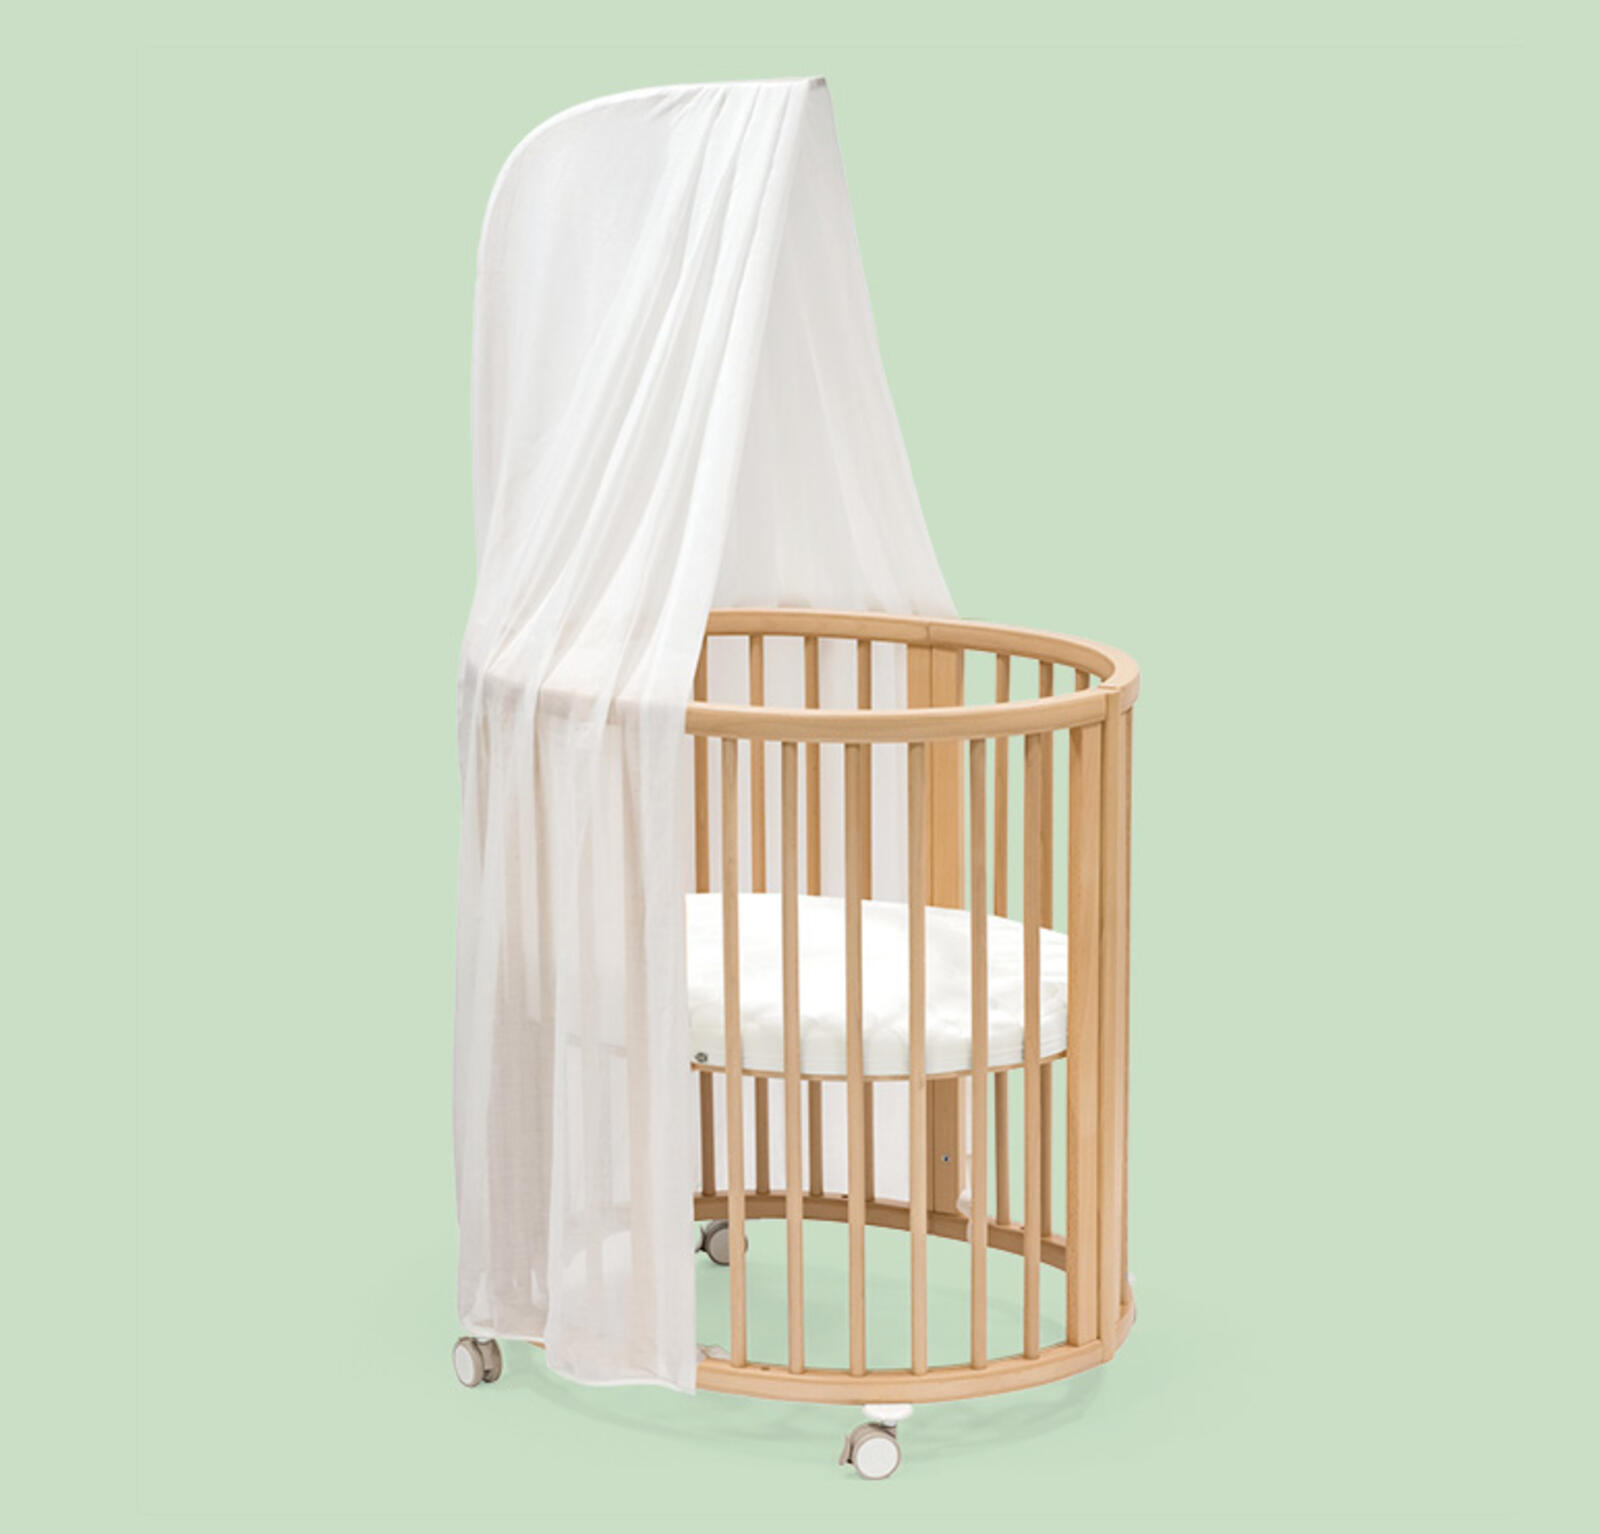 Optional Bed Extension to Fit Children Up to 10 Years Stokke Sleepi Mini Stylish & Compact 4-in-1 Oval Crib Suitable for 0-6 Months Adjustable 